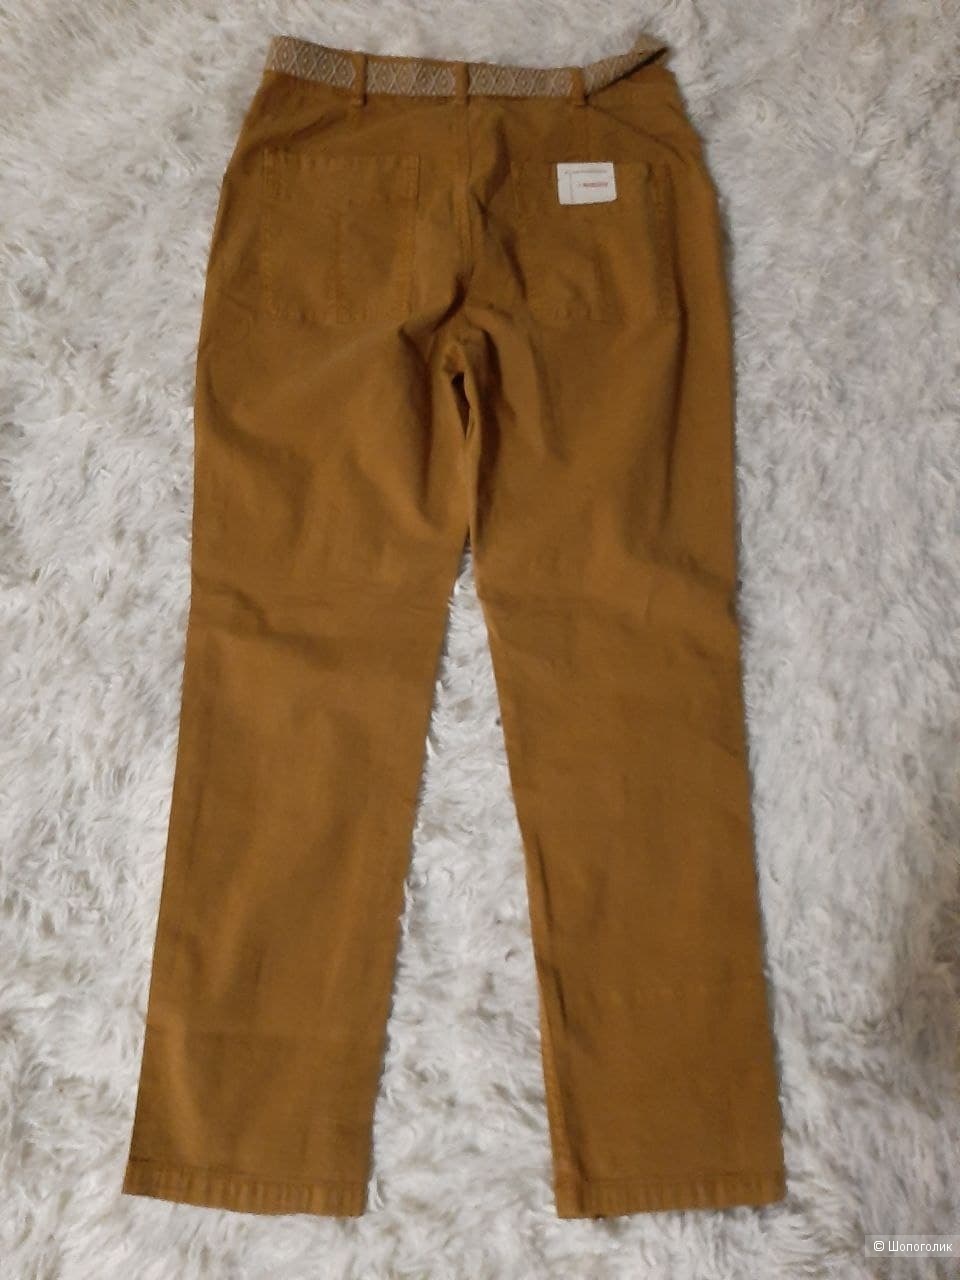 Anthropologie The Wanderer Utility Pants р 28